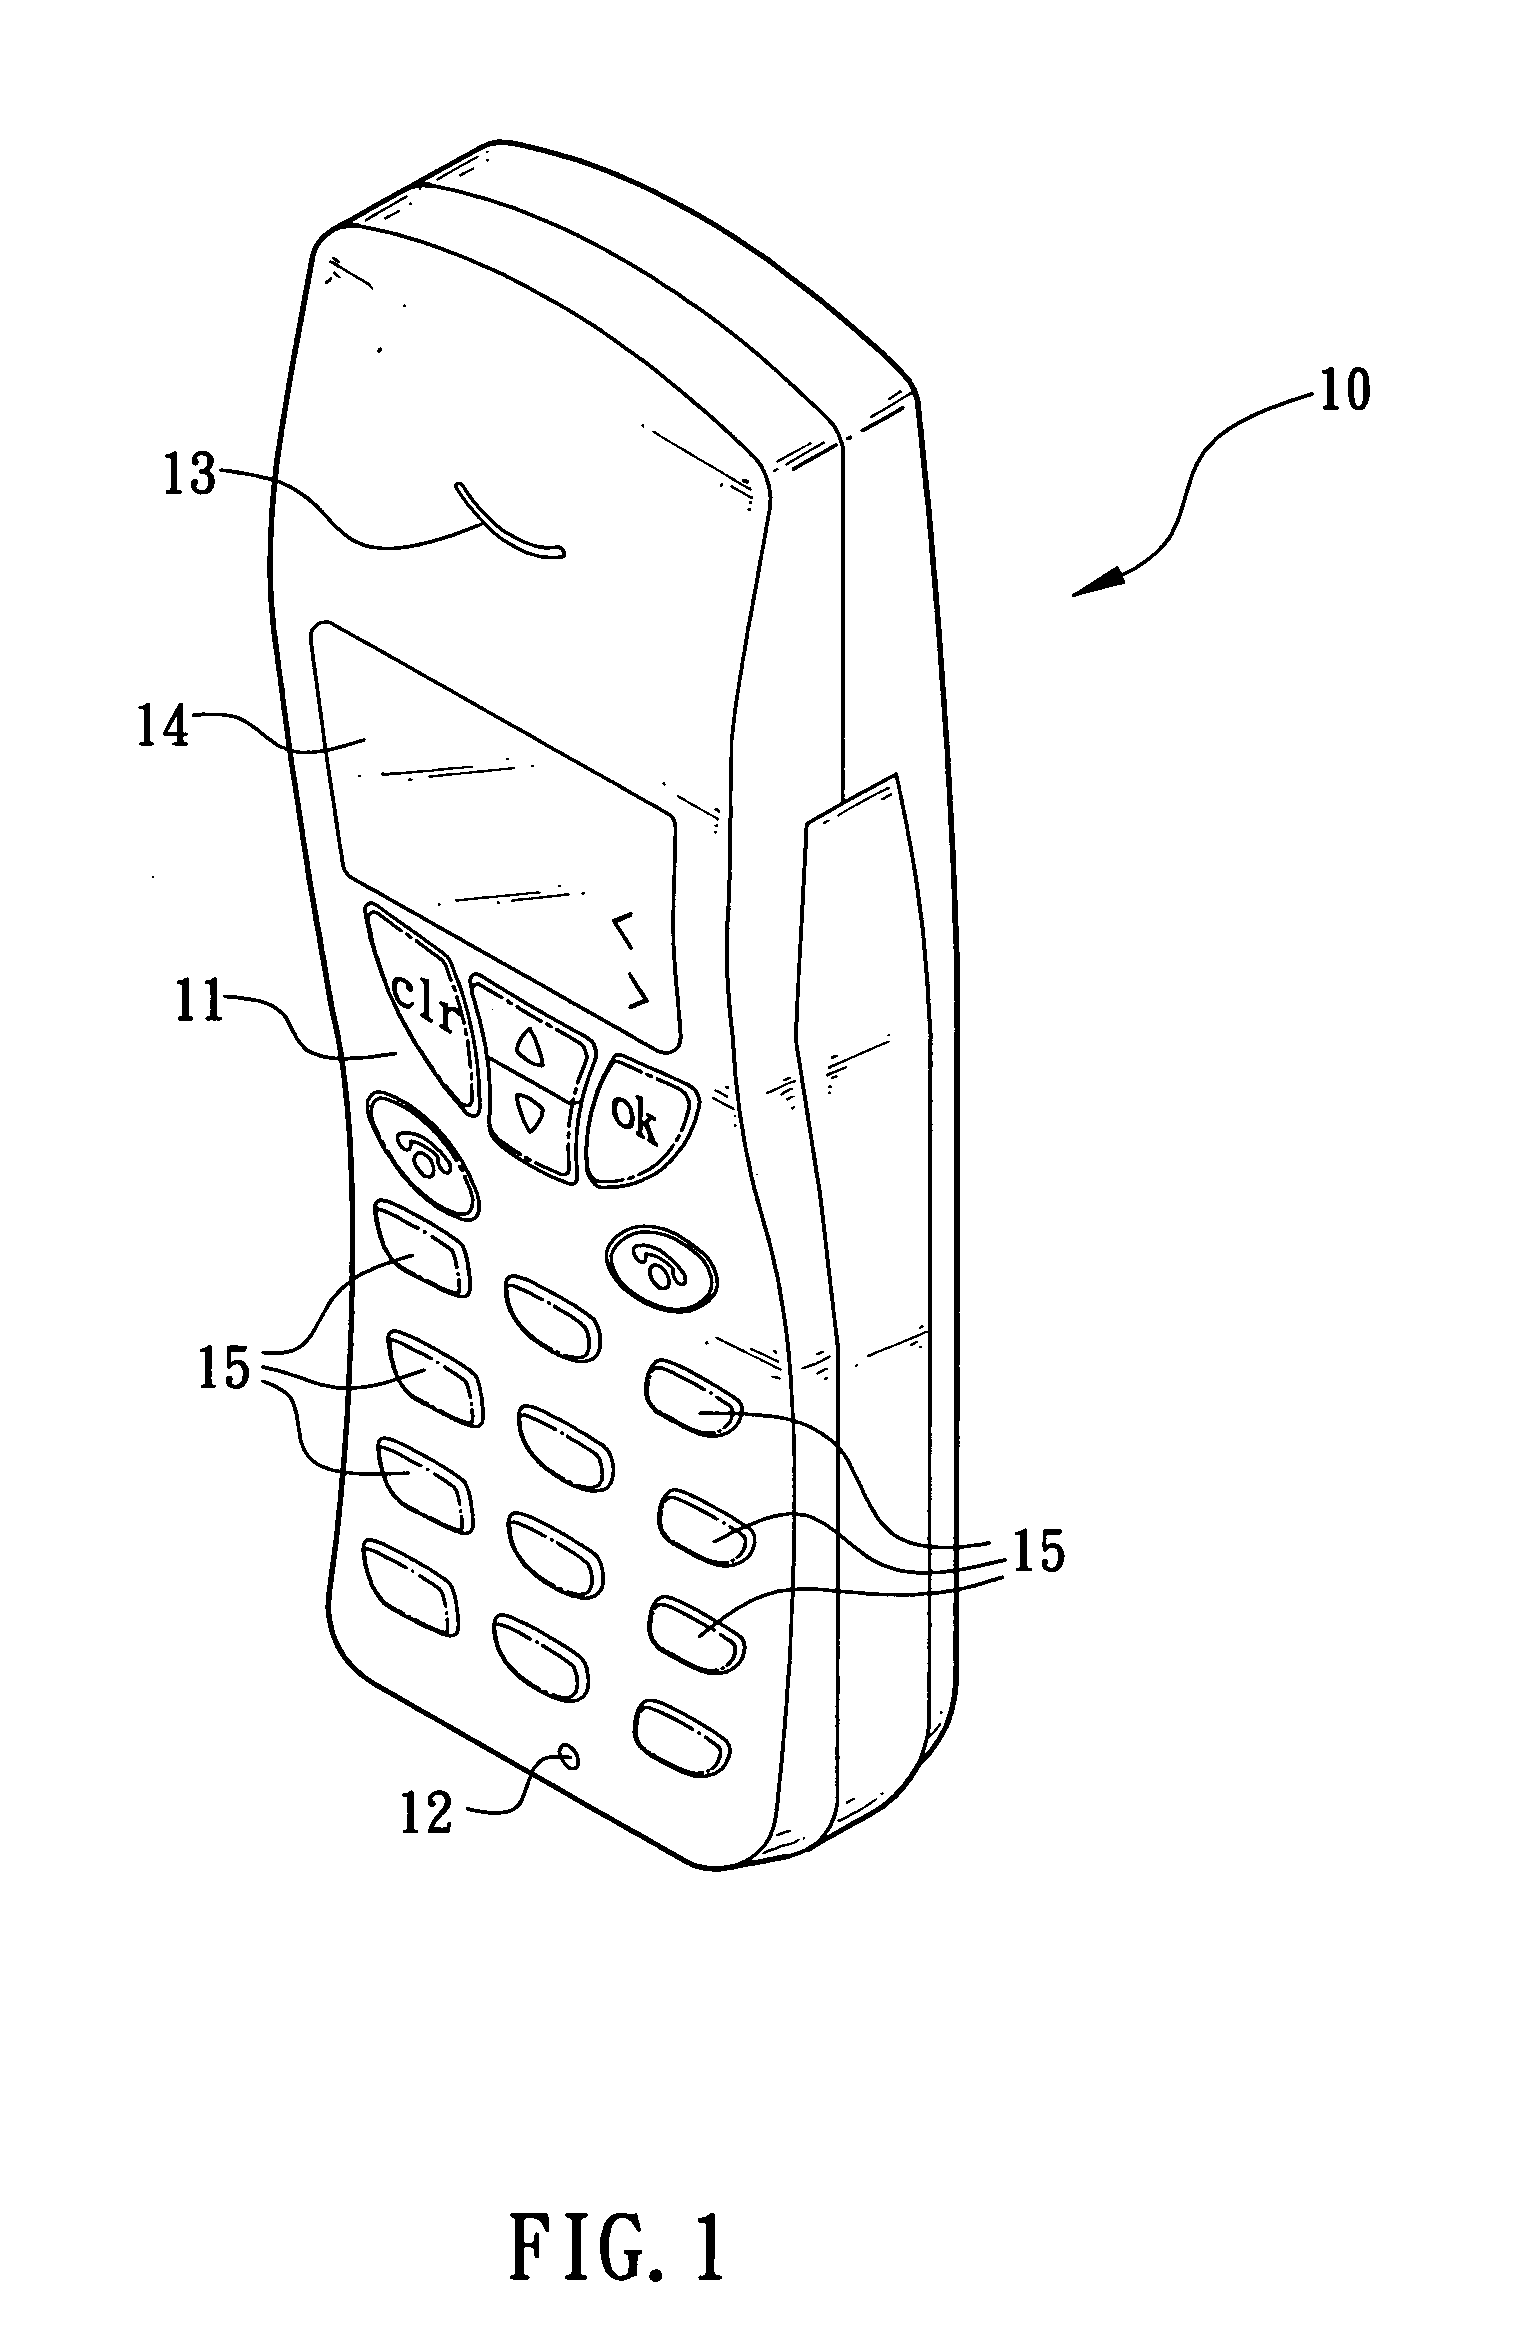 Mobile phone with a stereo recording function